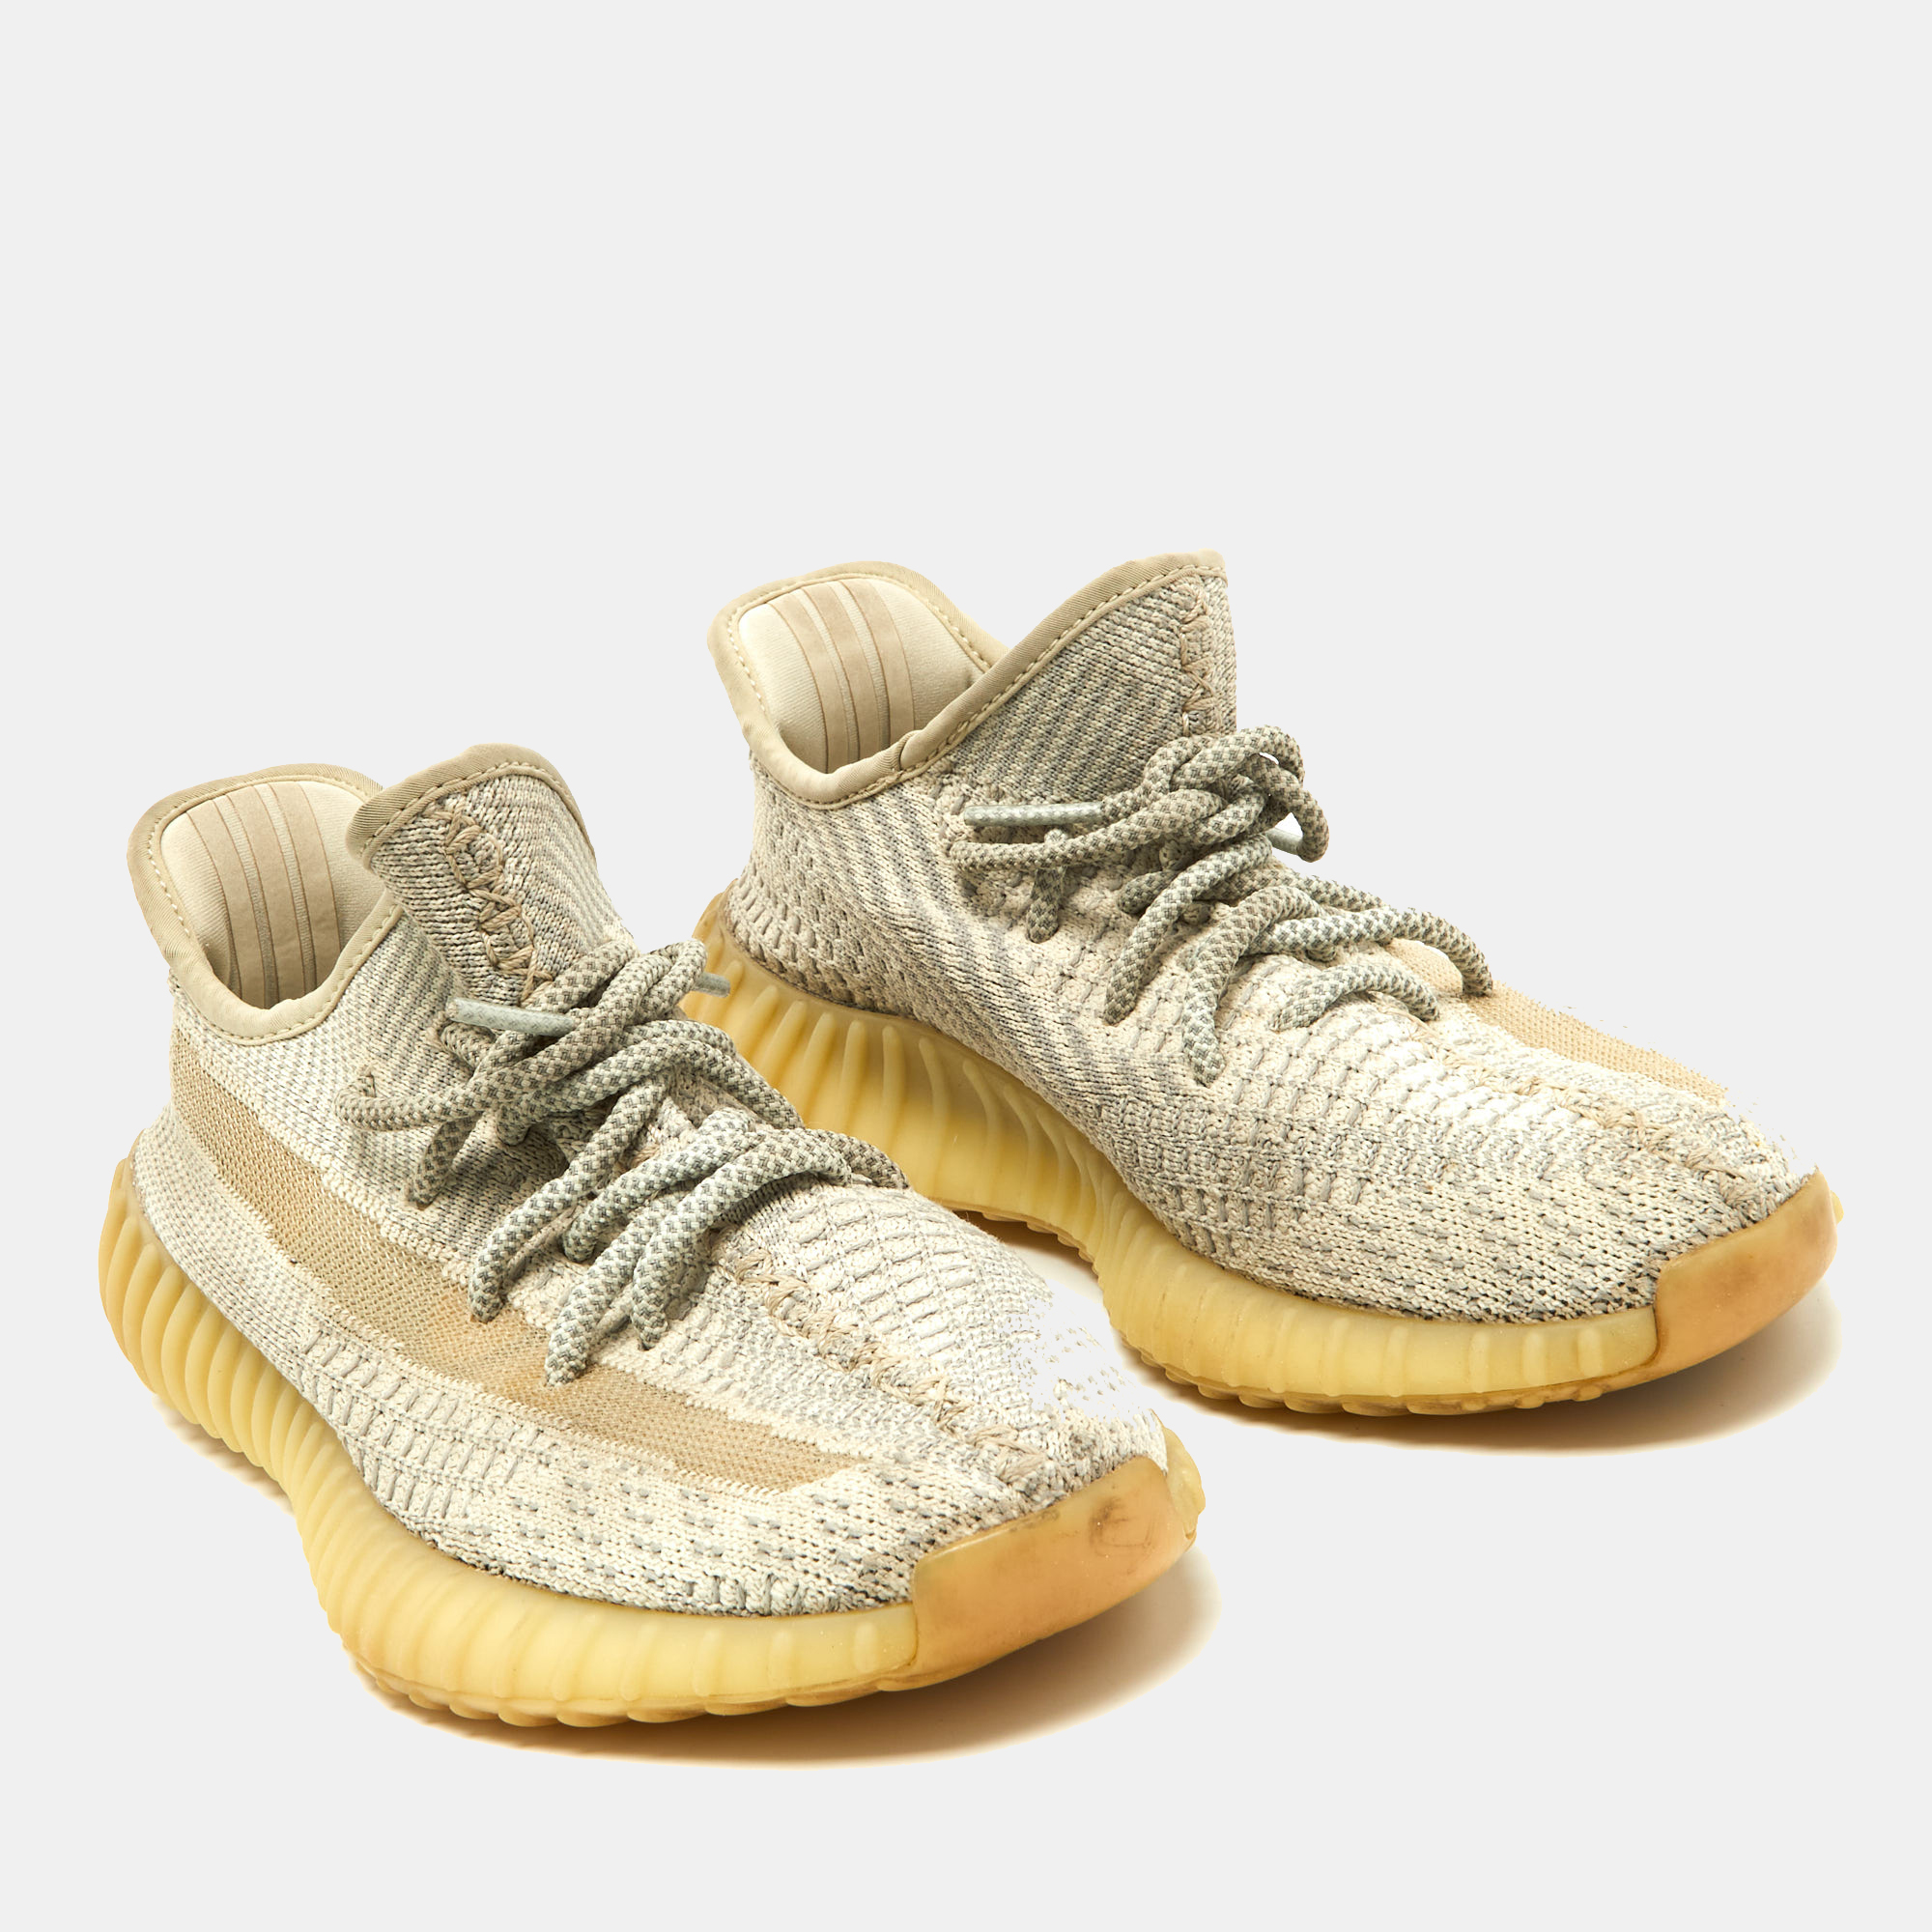 Yeezy X Adidas Boost 350 V2 Lundmark Non-Reflective Sneakers Size 38